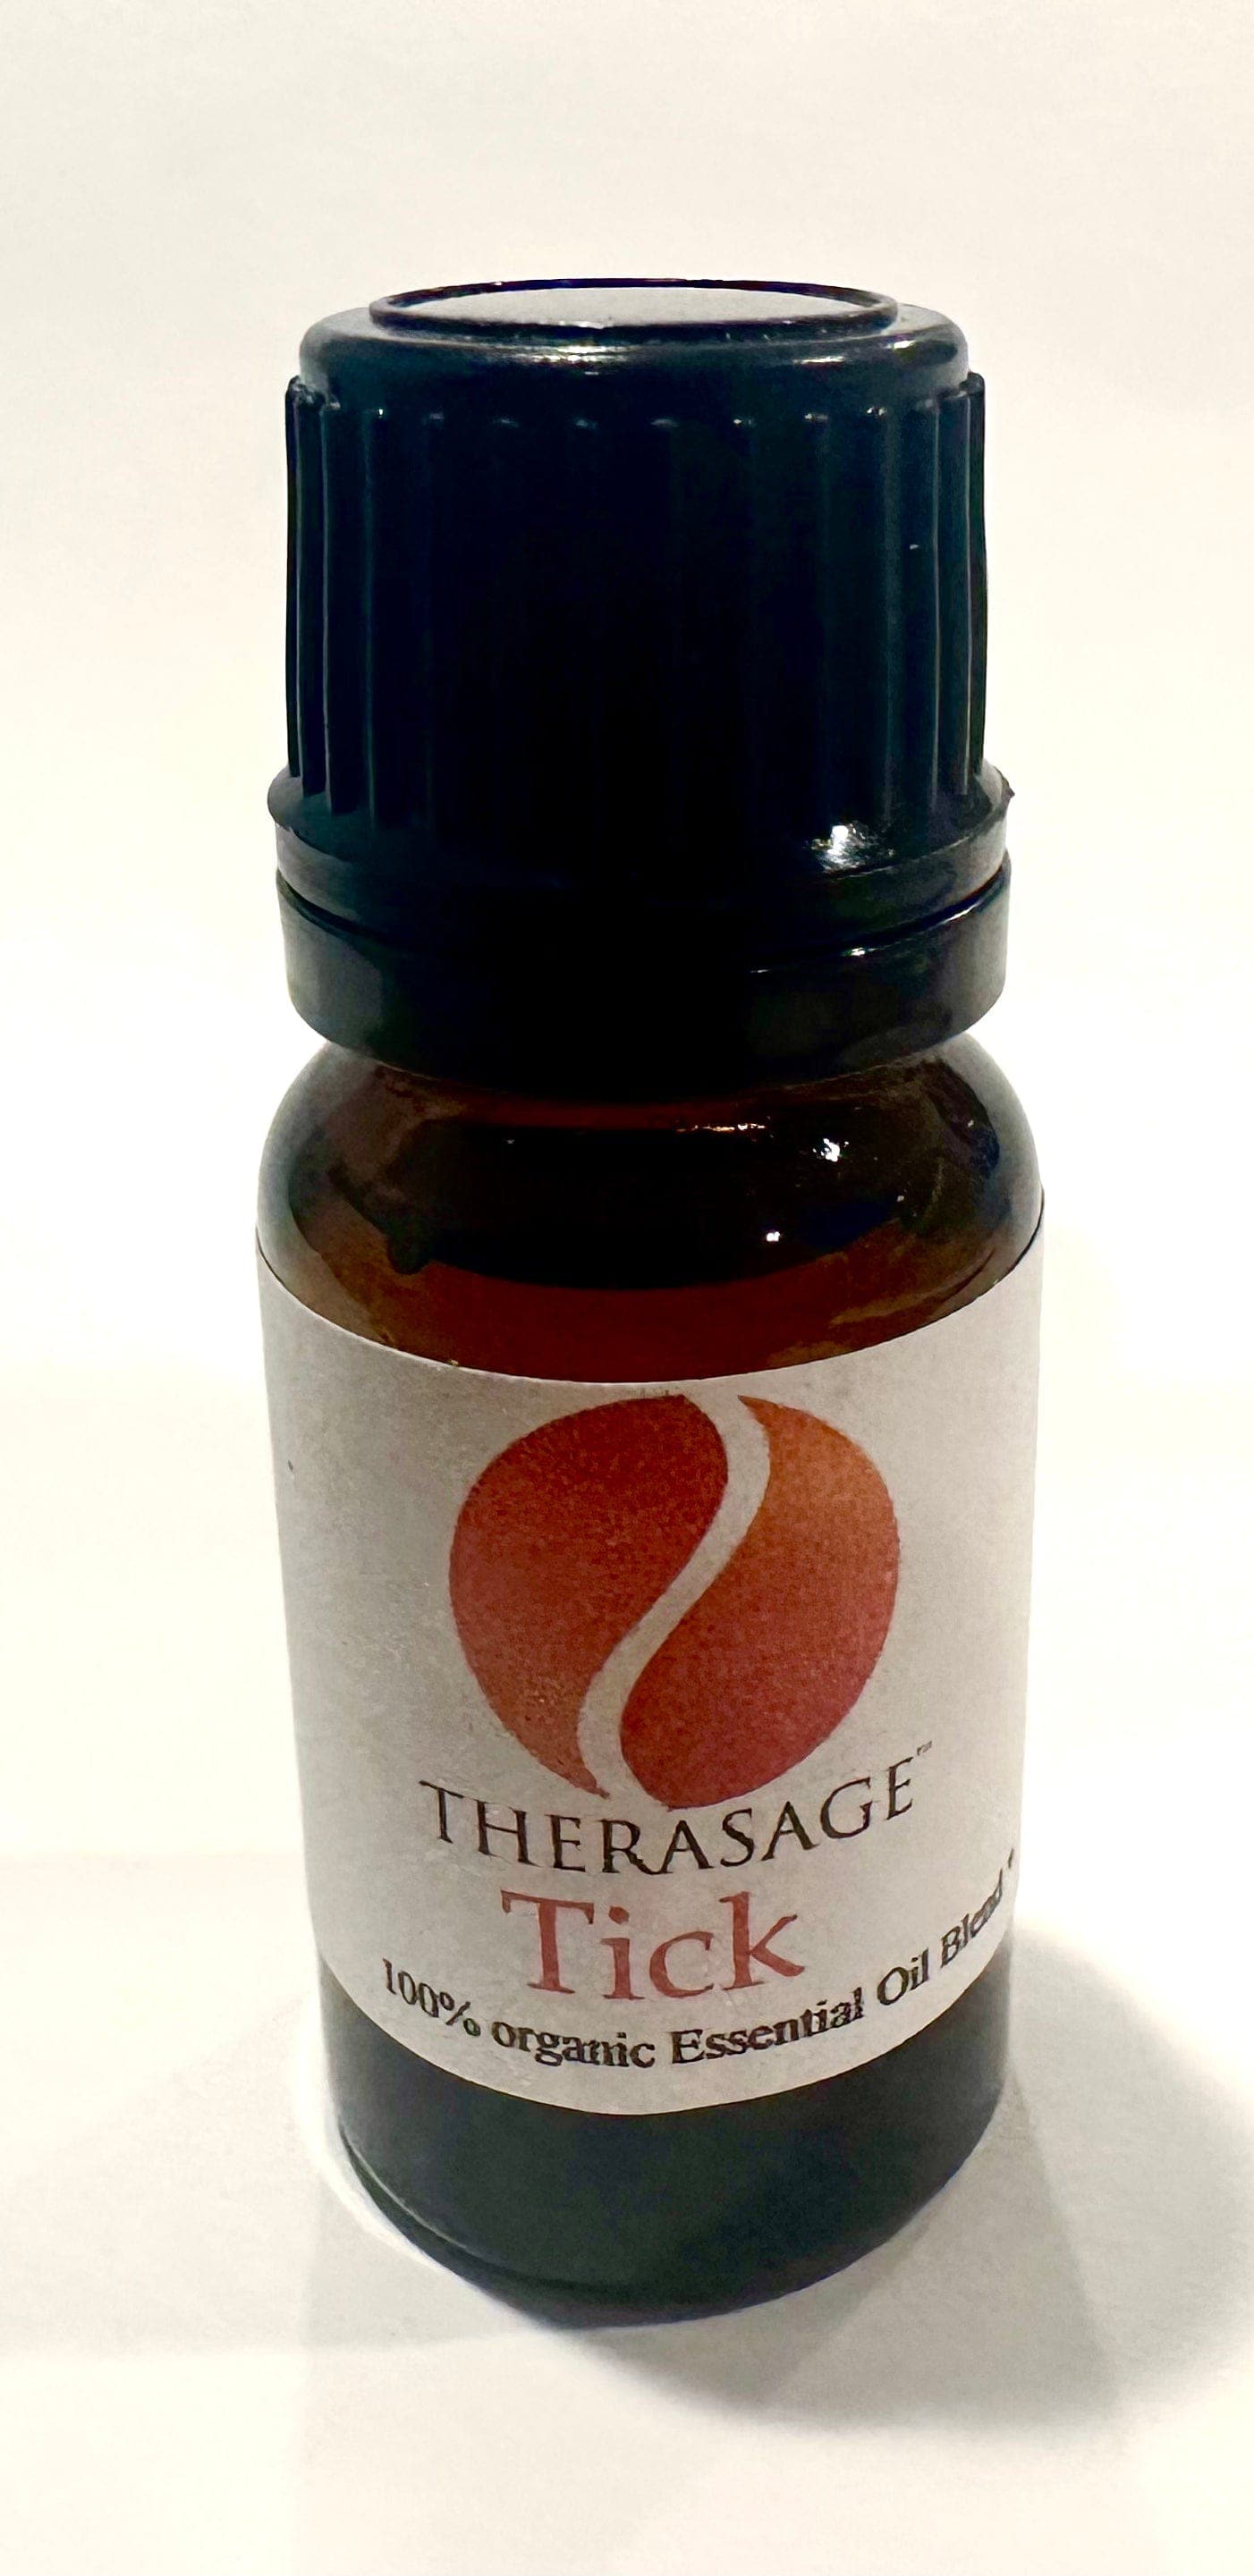 Therasage All Tick Therasage TheraEssential Oil Blend